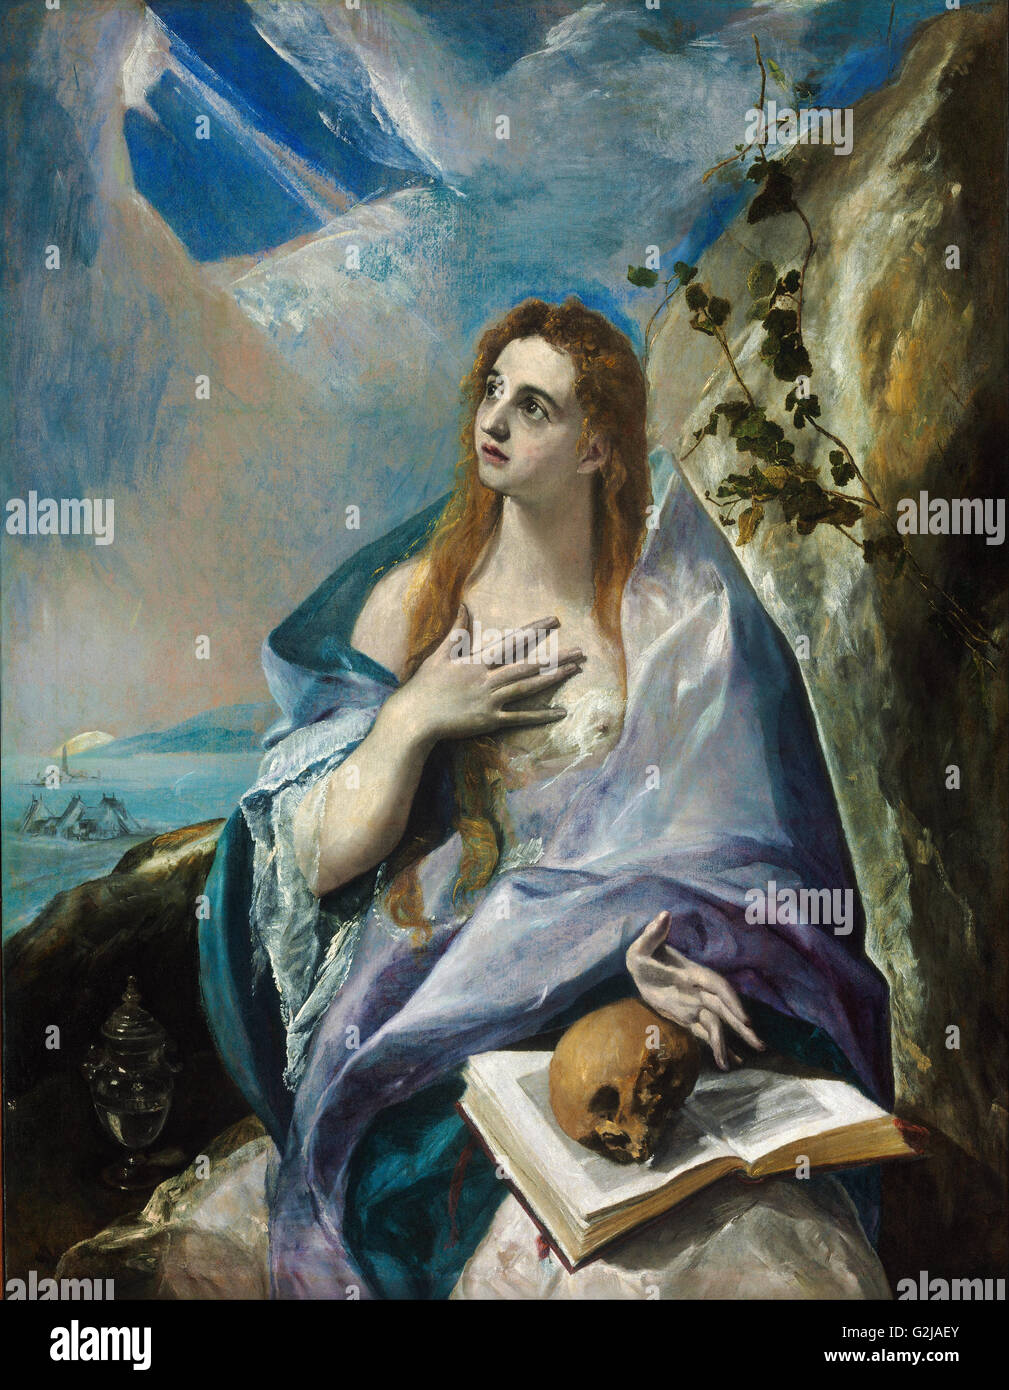 El Greco - The Penitent Magdalene  - Museum of Fine Arts, Budapest Stock Photo